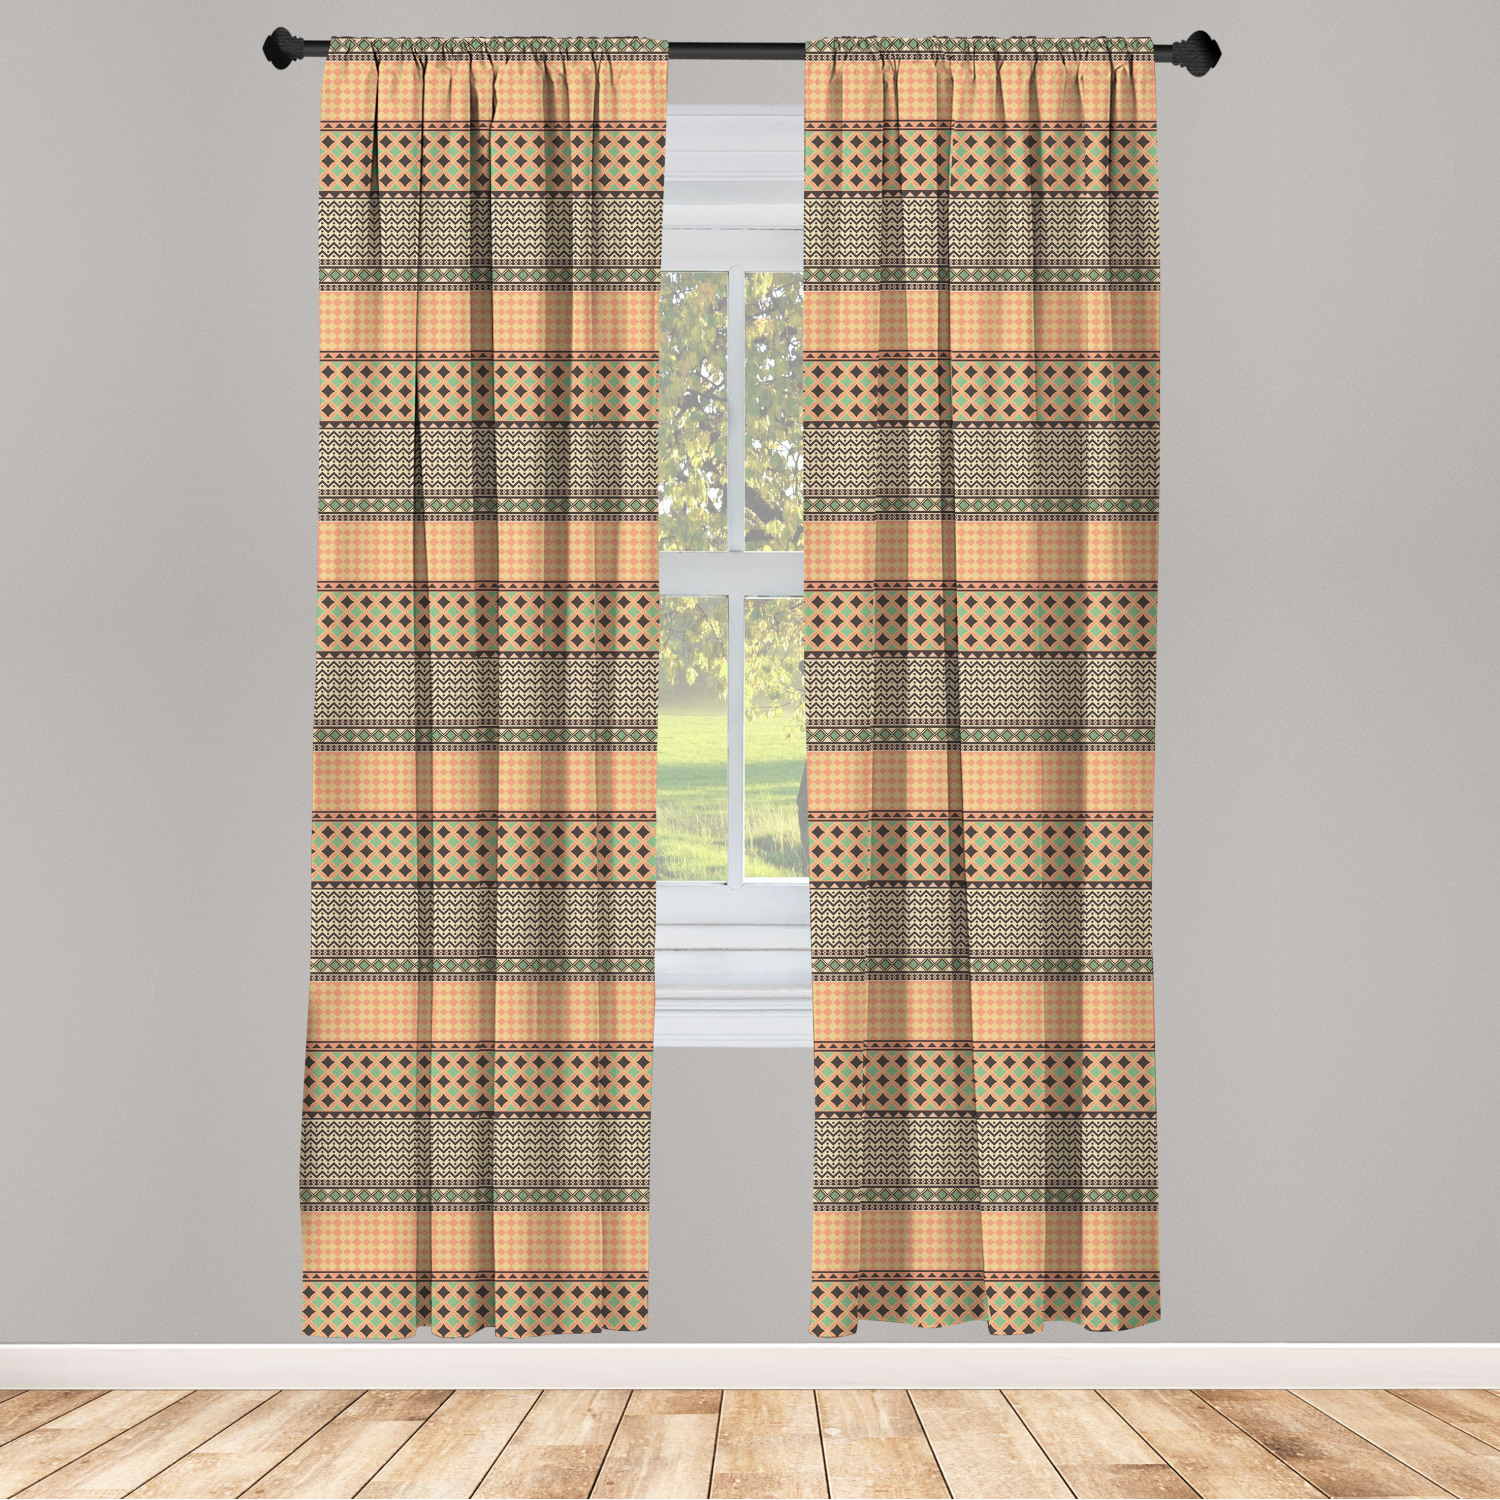 Kente Pattern Microfiber Curtains 2 Panel Set for Living Room Bedroom in 3 Sizes 